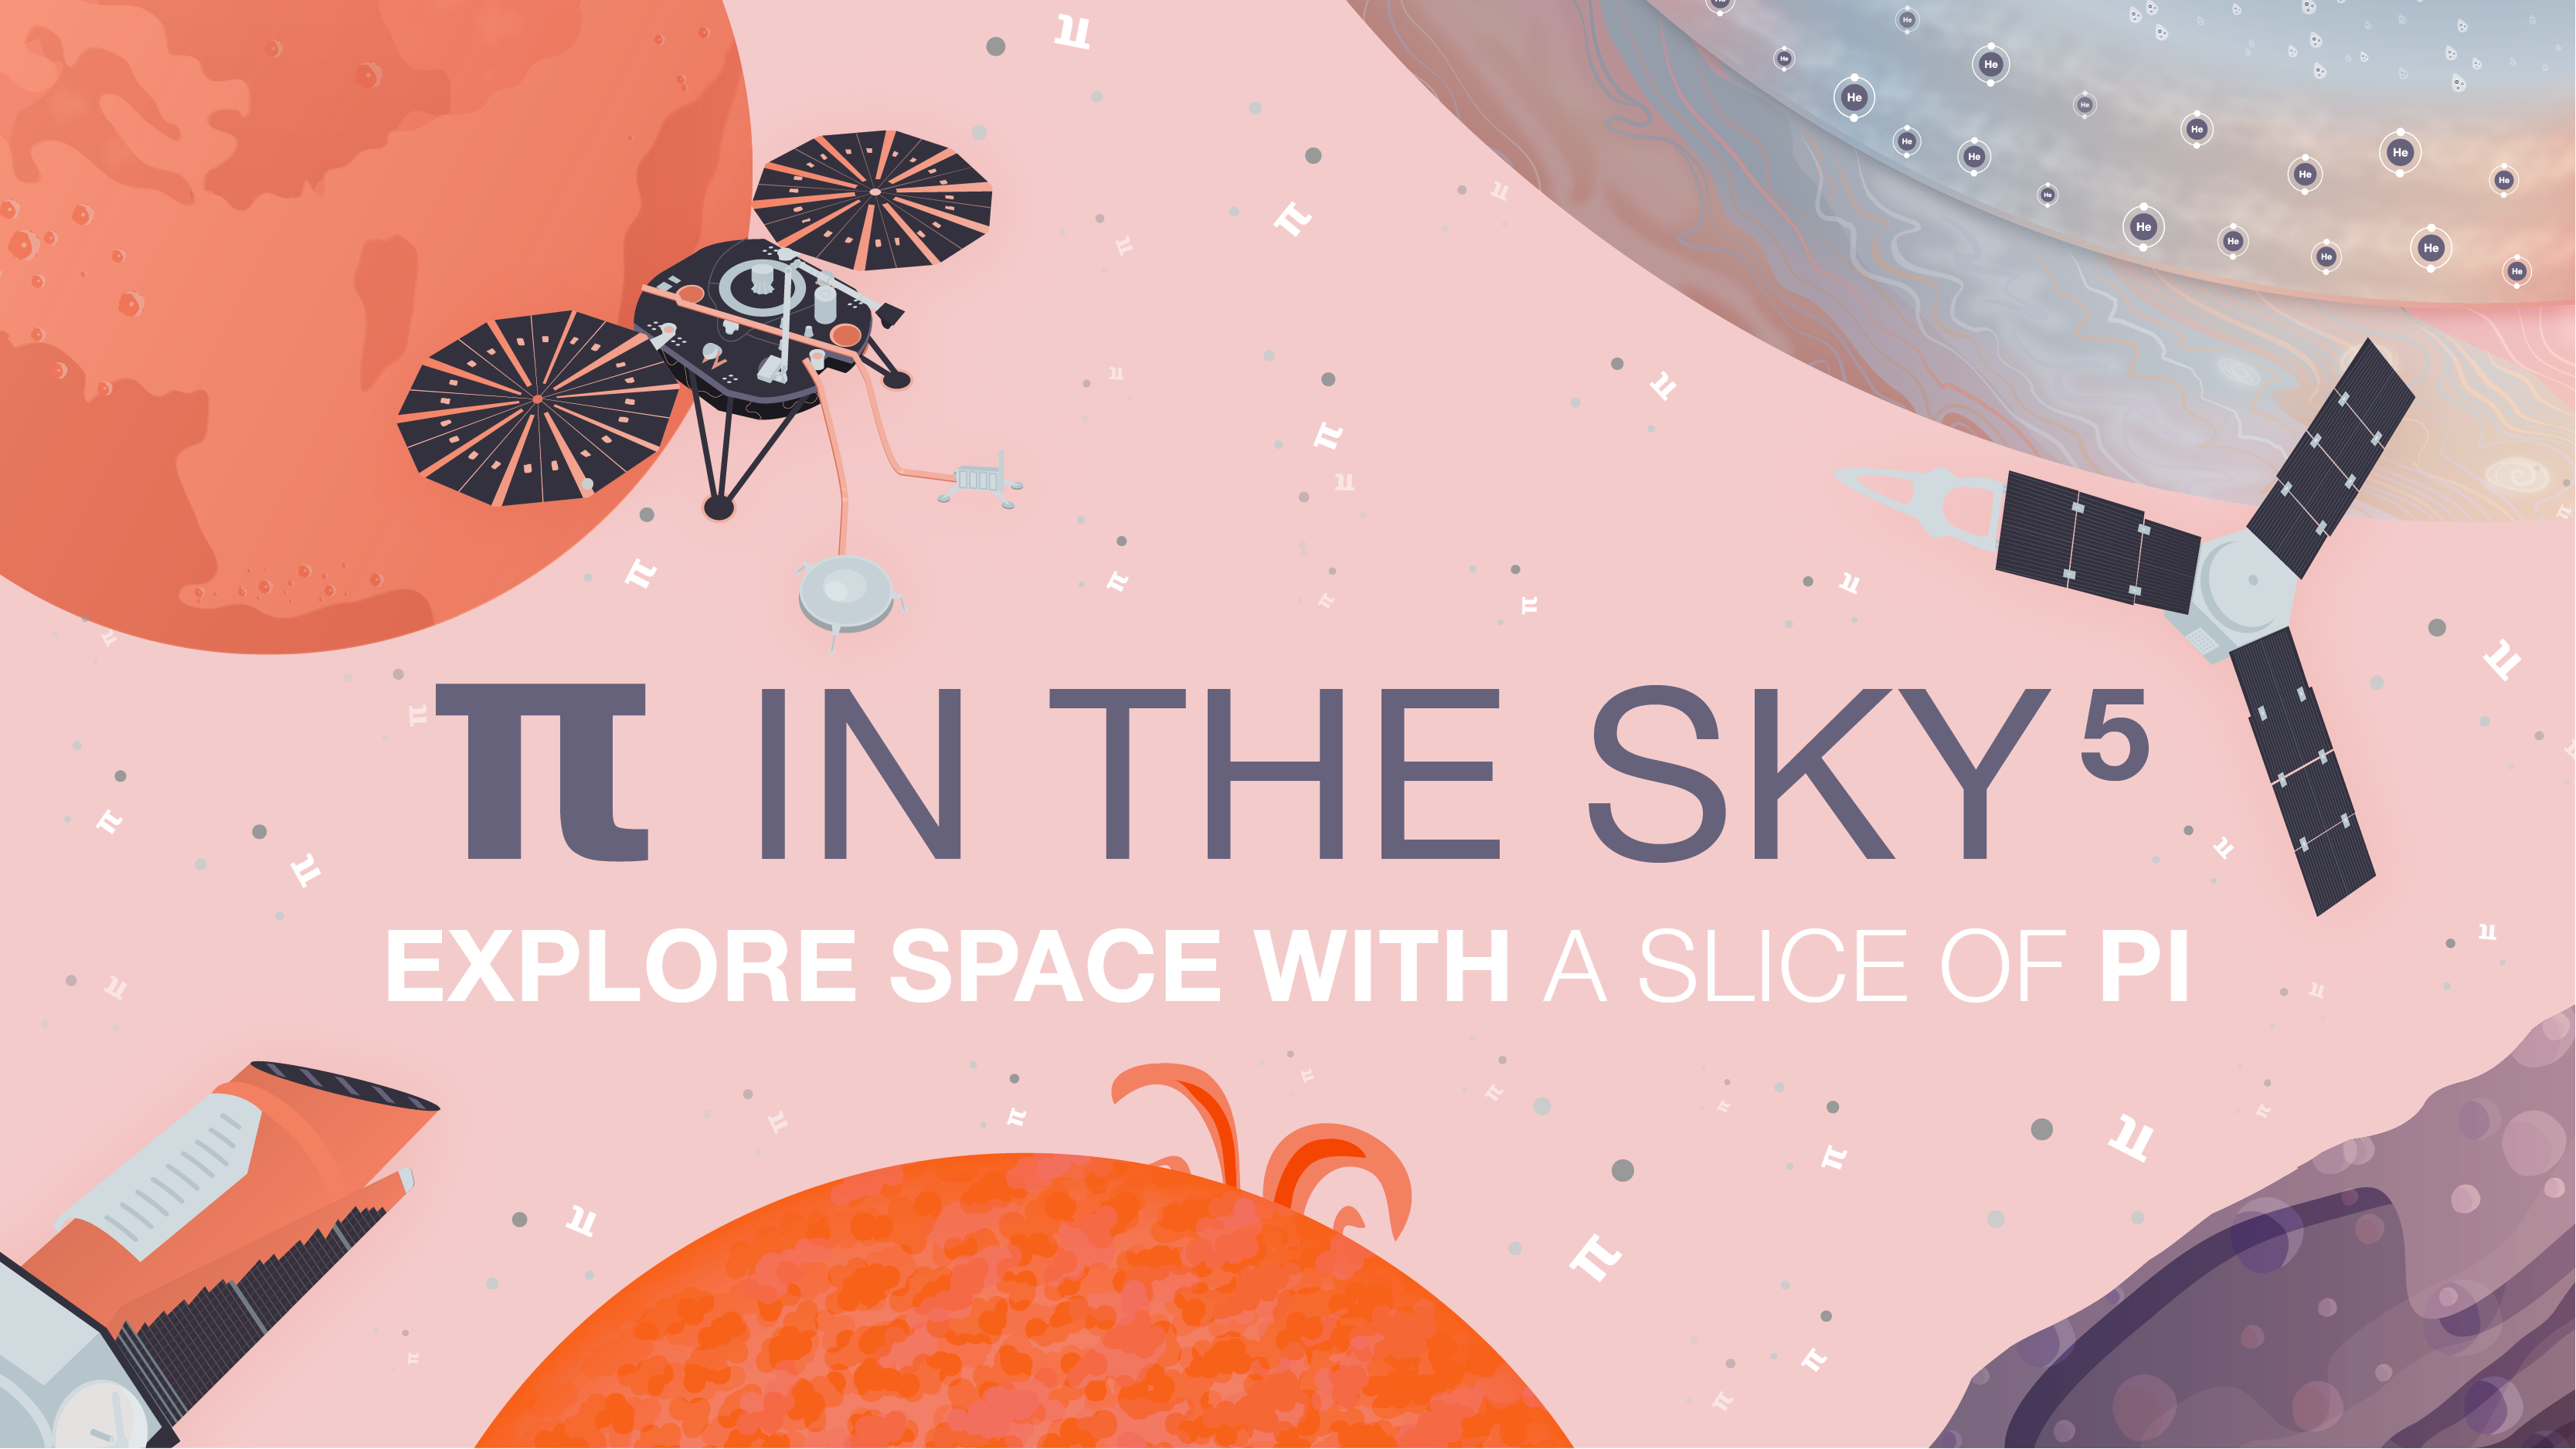 Pi in the Sky 5: Explore Space With A Slice of Pi